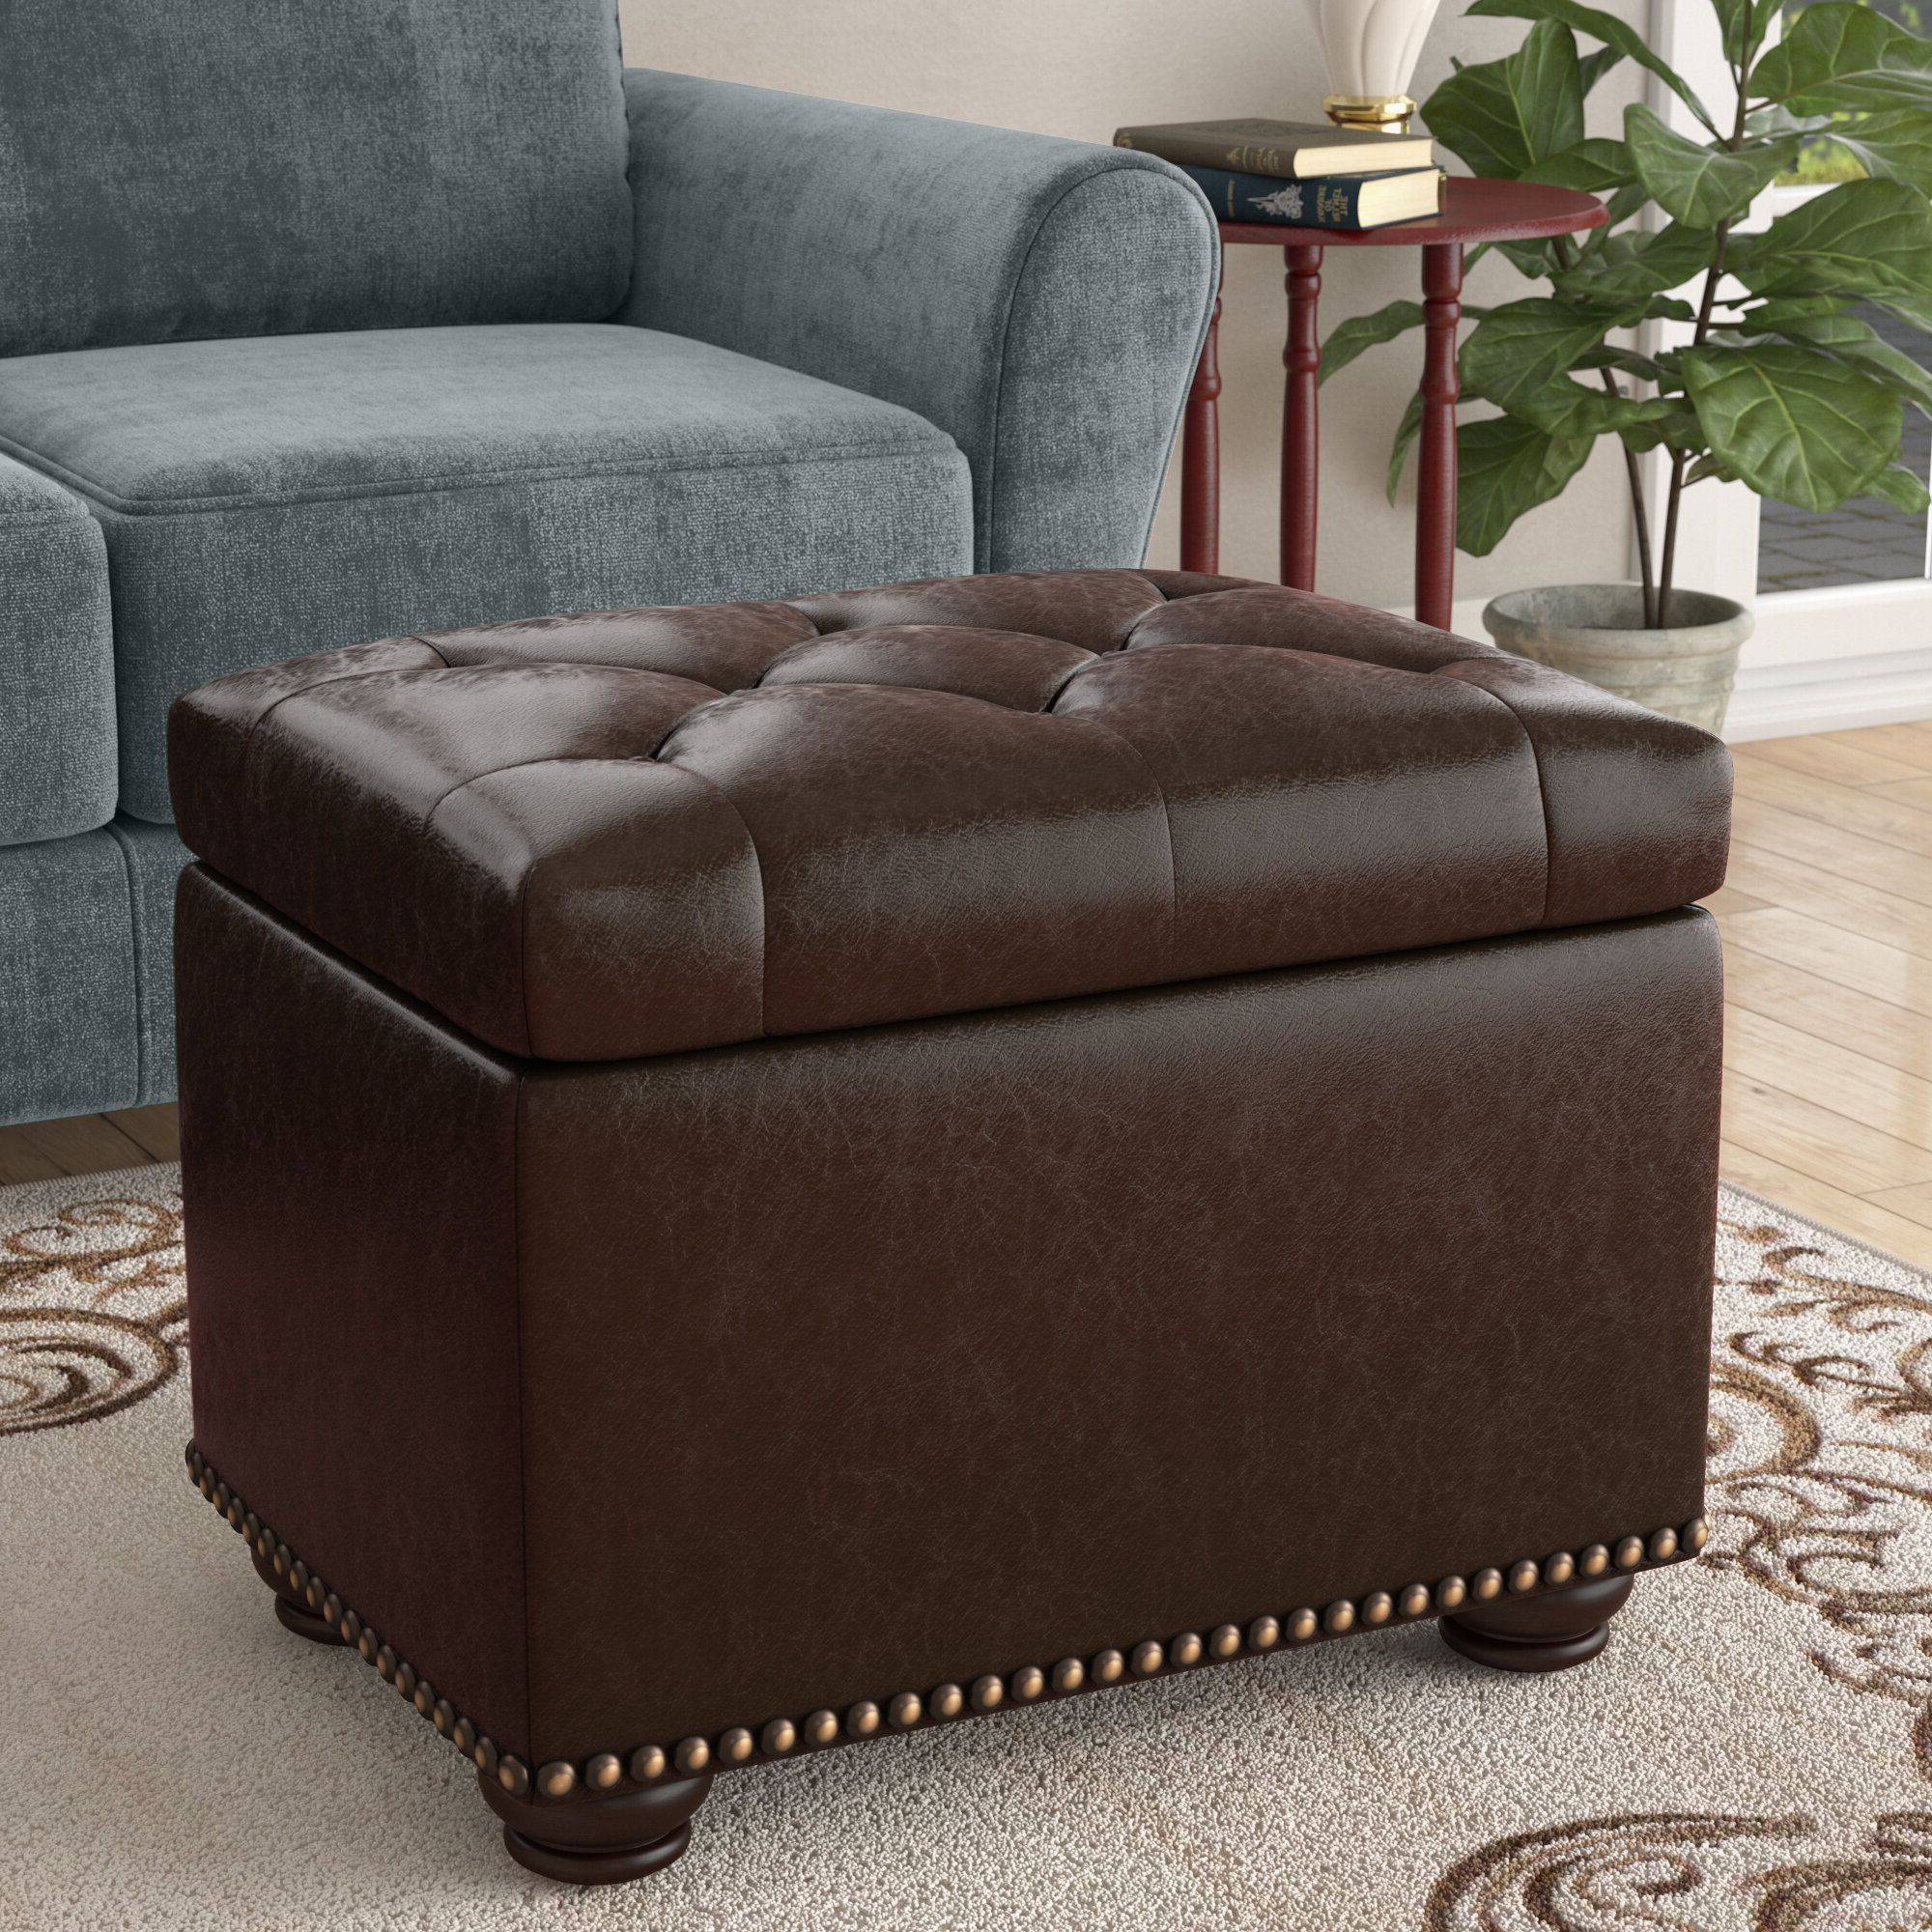 Latest Boston Espresso Brown Tufted Leather Storage Ottoman Coffee Table Intended For Dark Brown Leather Pouf Ottomans (View 2 of 10)